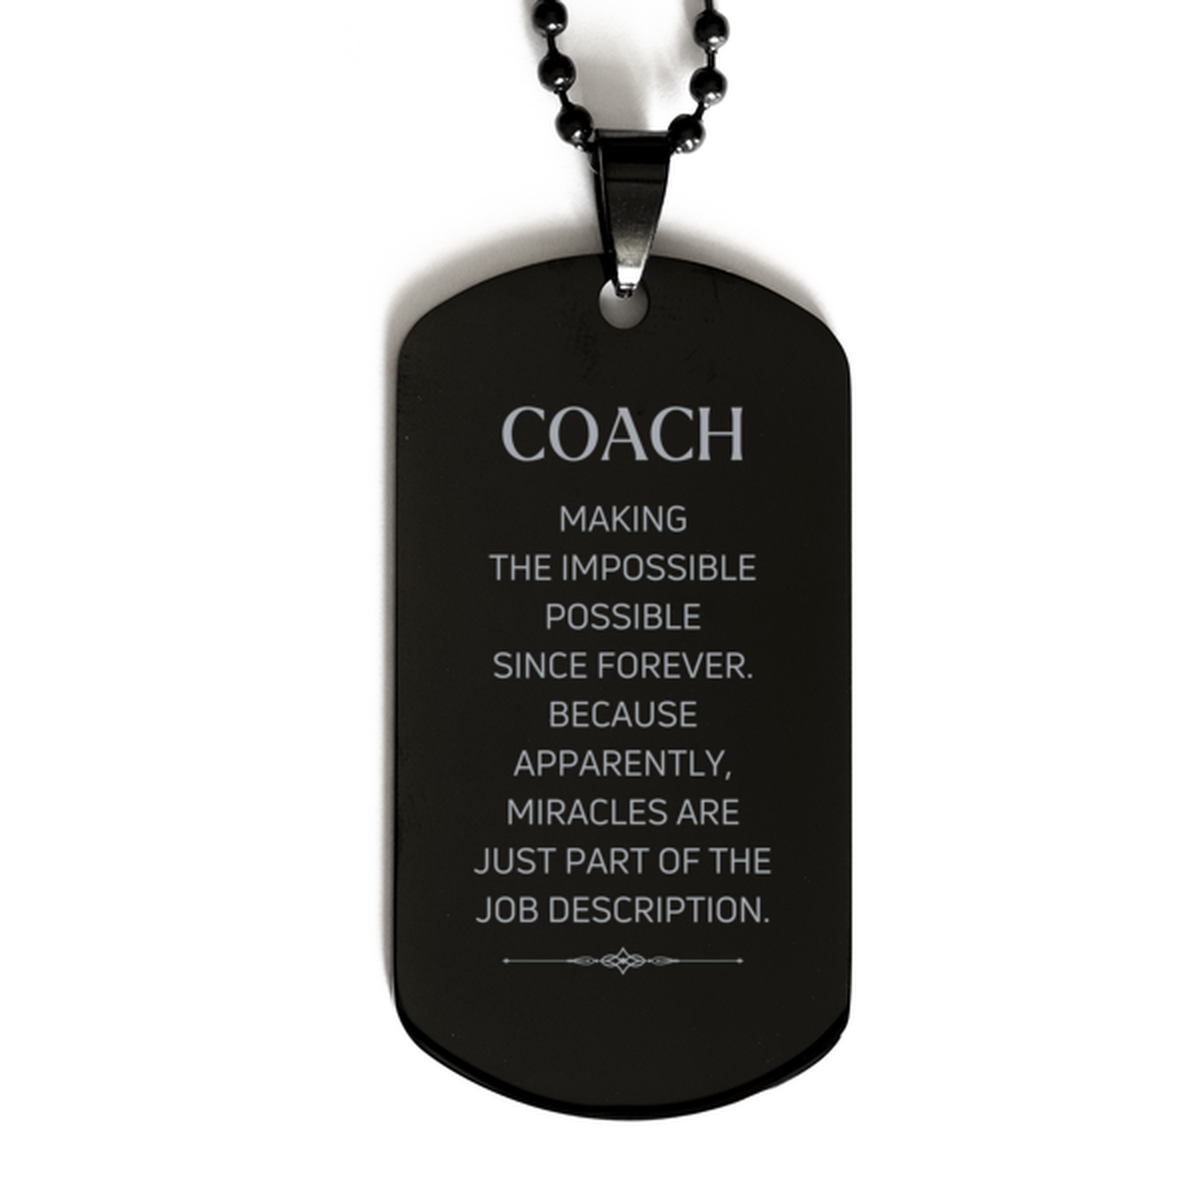 Funny Coach Gifts, Miracles are just part of the job description, Inspirational Birthday Black Dog Tag For Coach, Men, Women, Coworkers, Friends, Boss